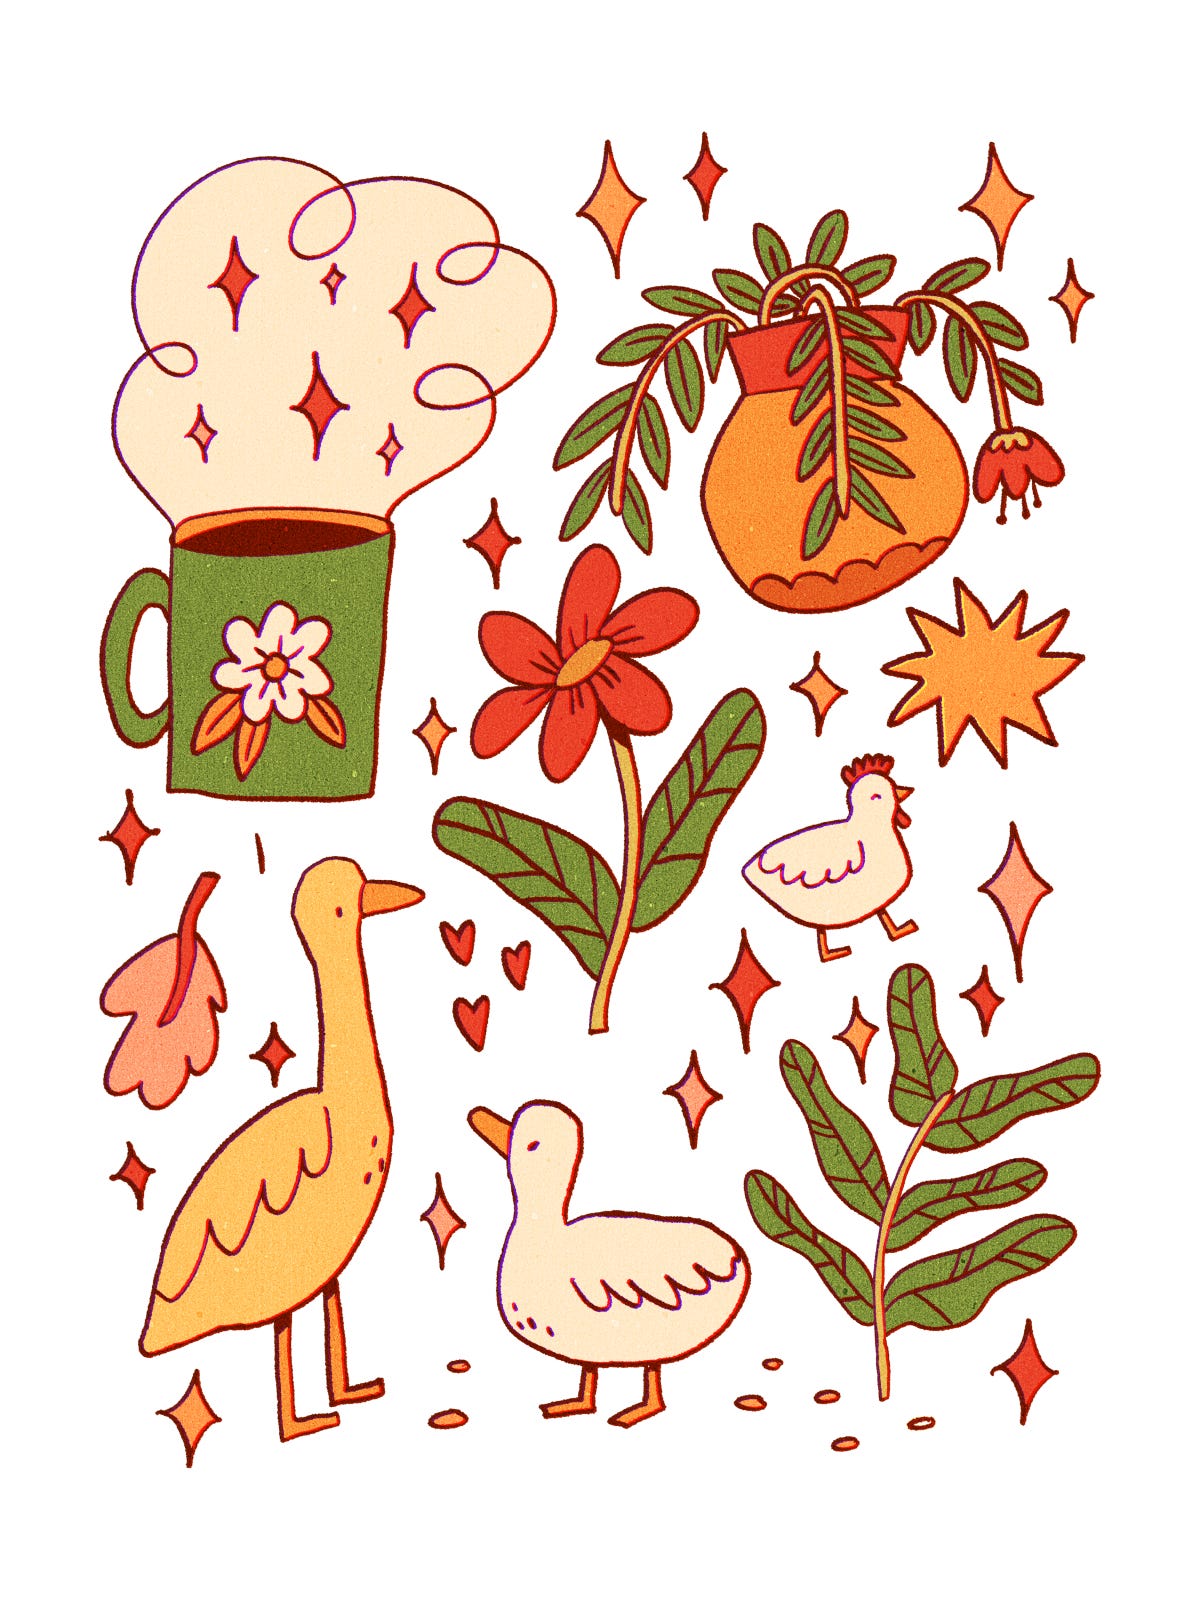 A digital drawing of a collection of many cute things: a duck and a bigger bird, a chicken, a magical coffee cup, some flowers and sparkly stars.